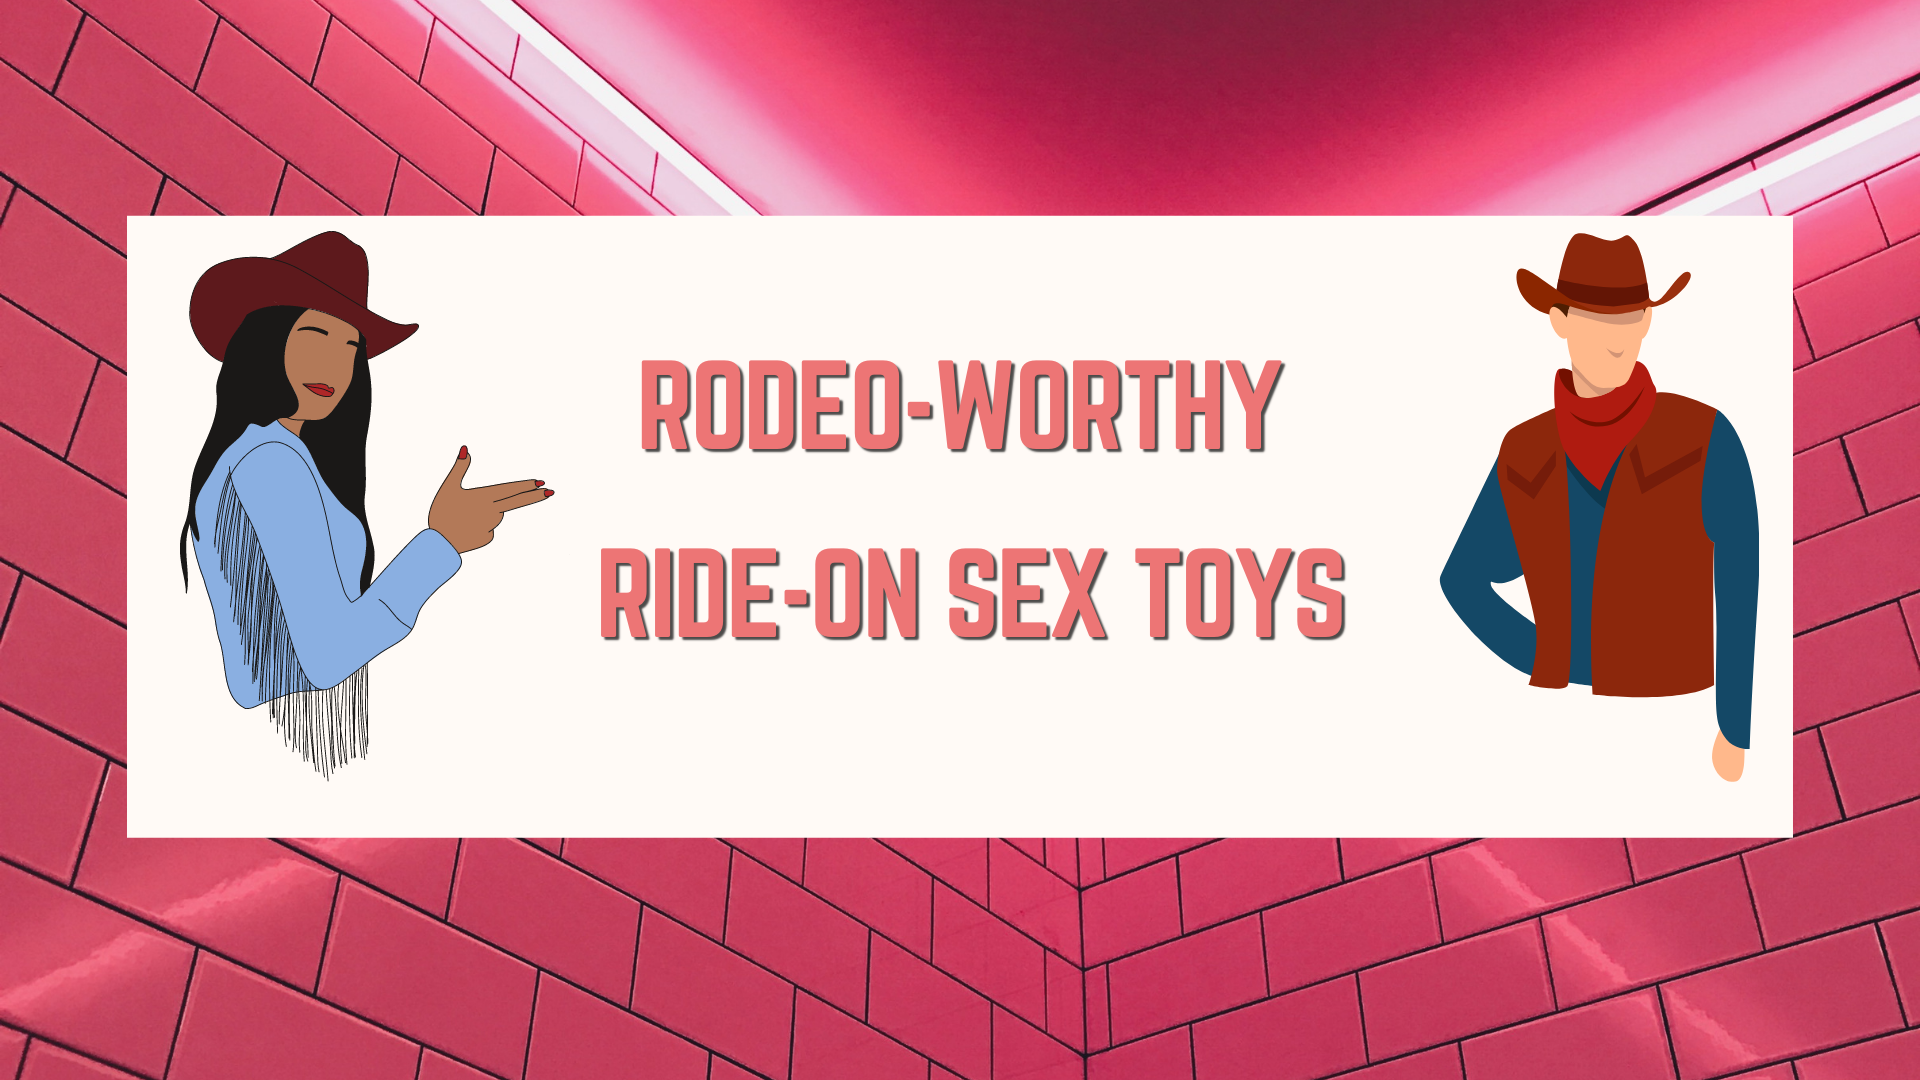 Rodeo-Worthy Ride-on Sex Toys